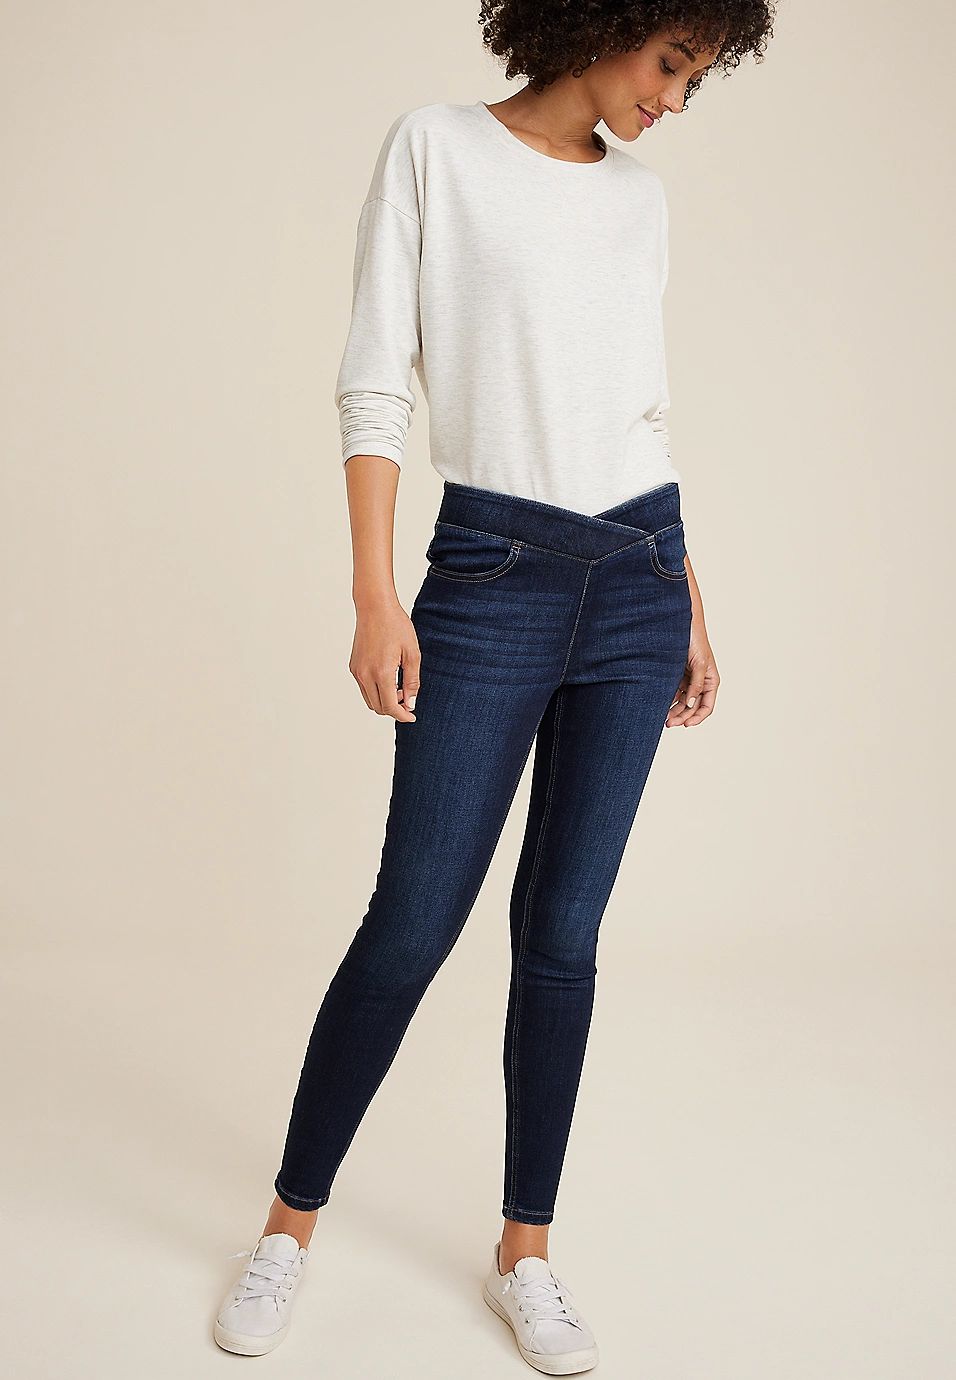 m jeans by maurices™ Cool Comfort Crossover Pull On High Rise Jegging | Maurices